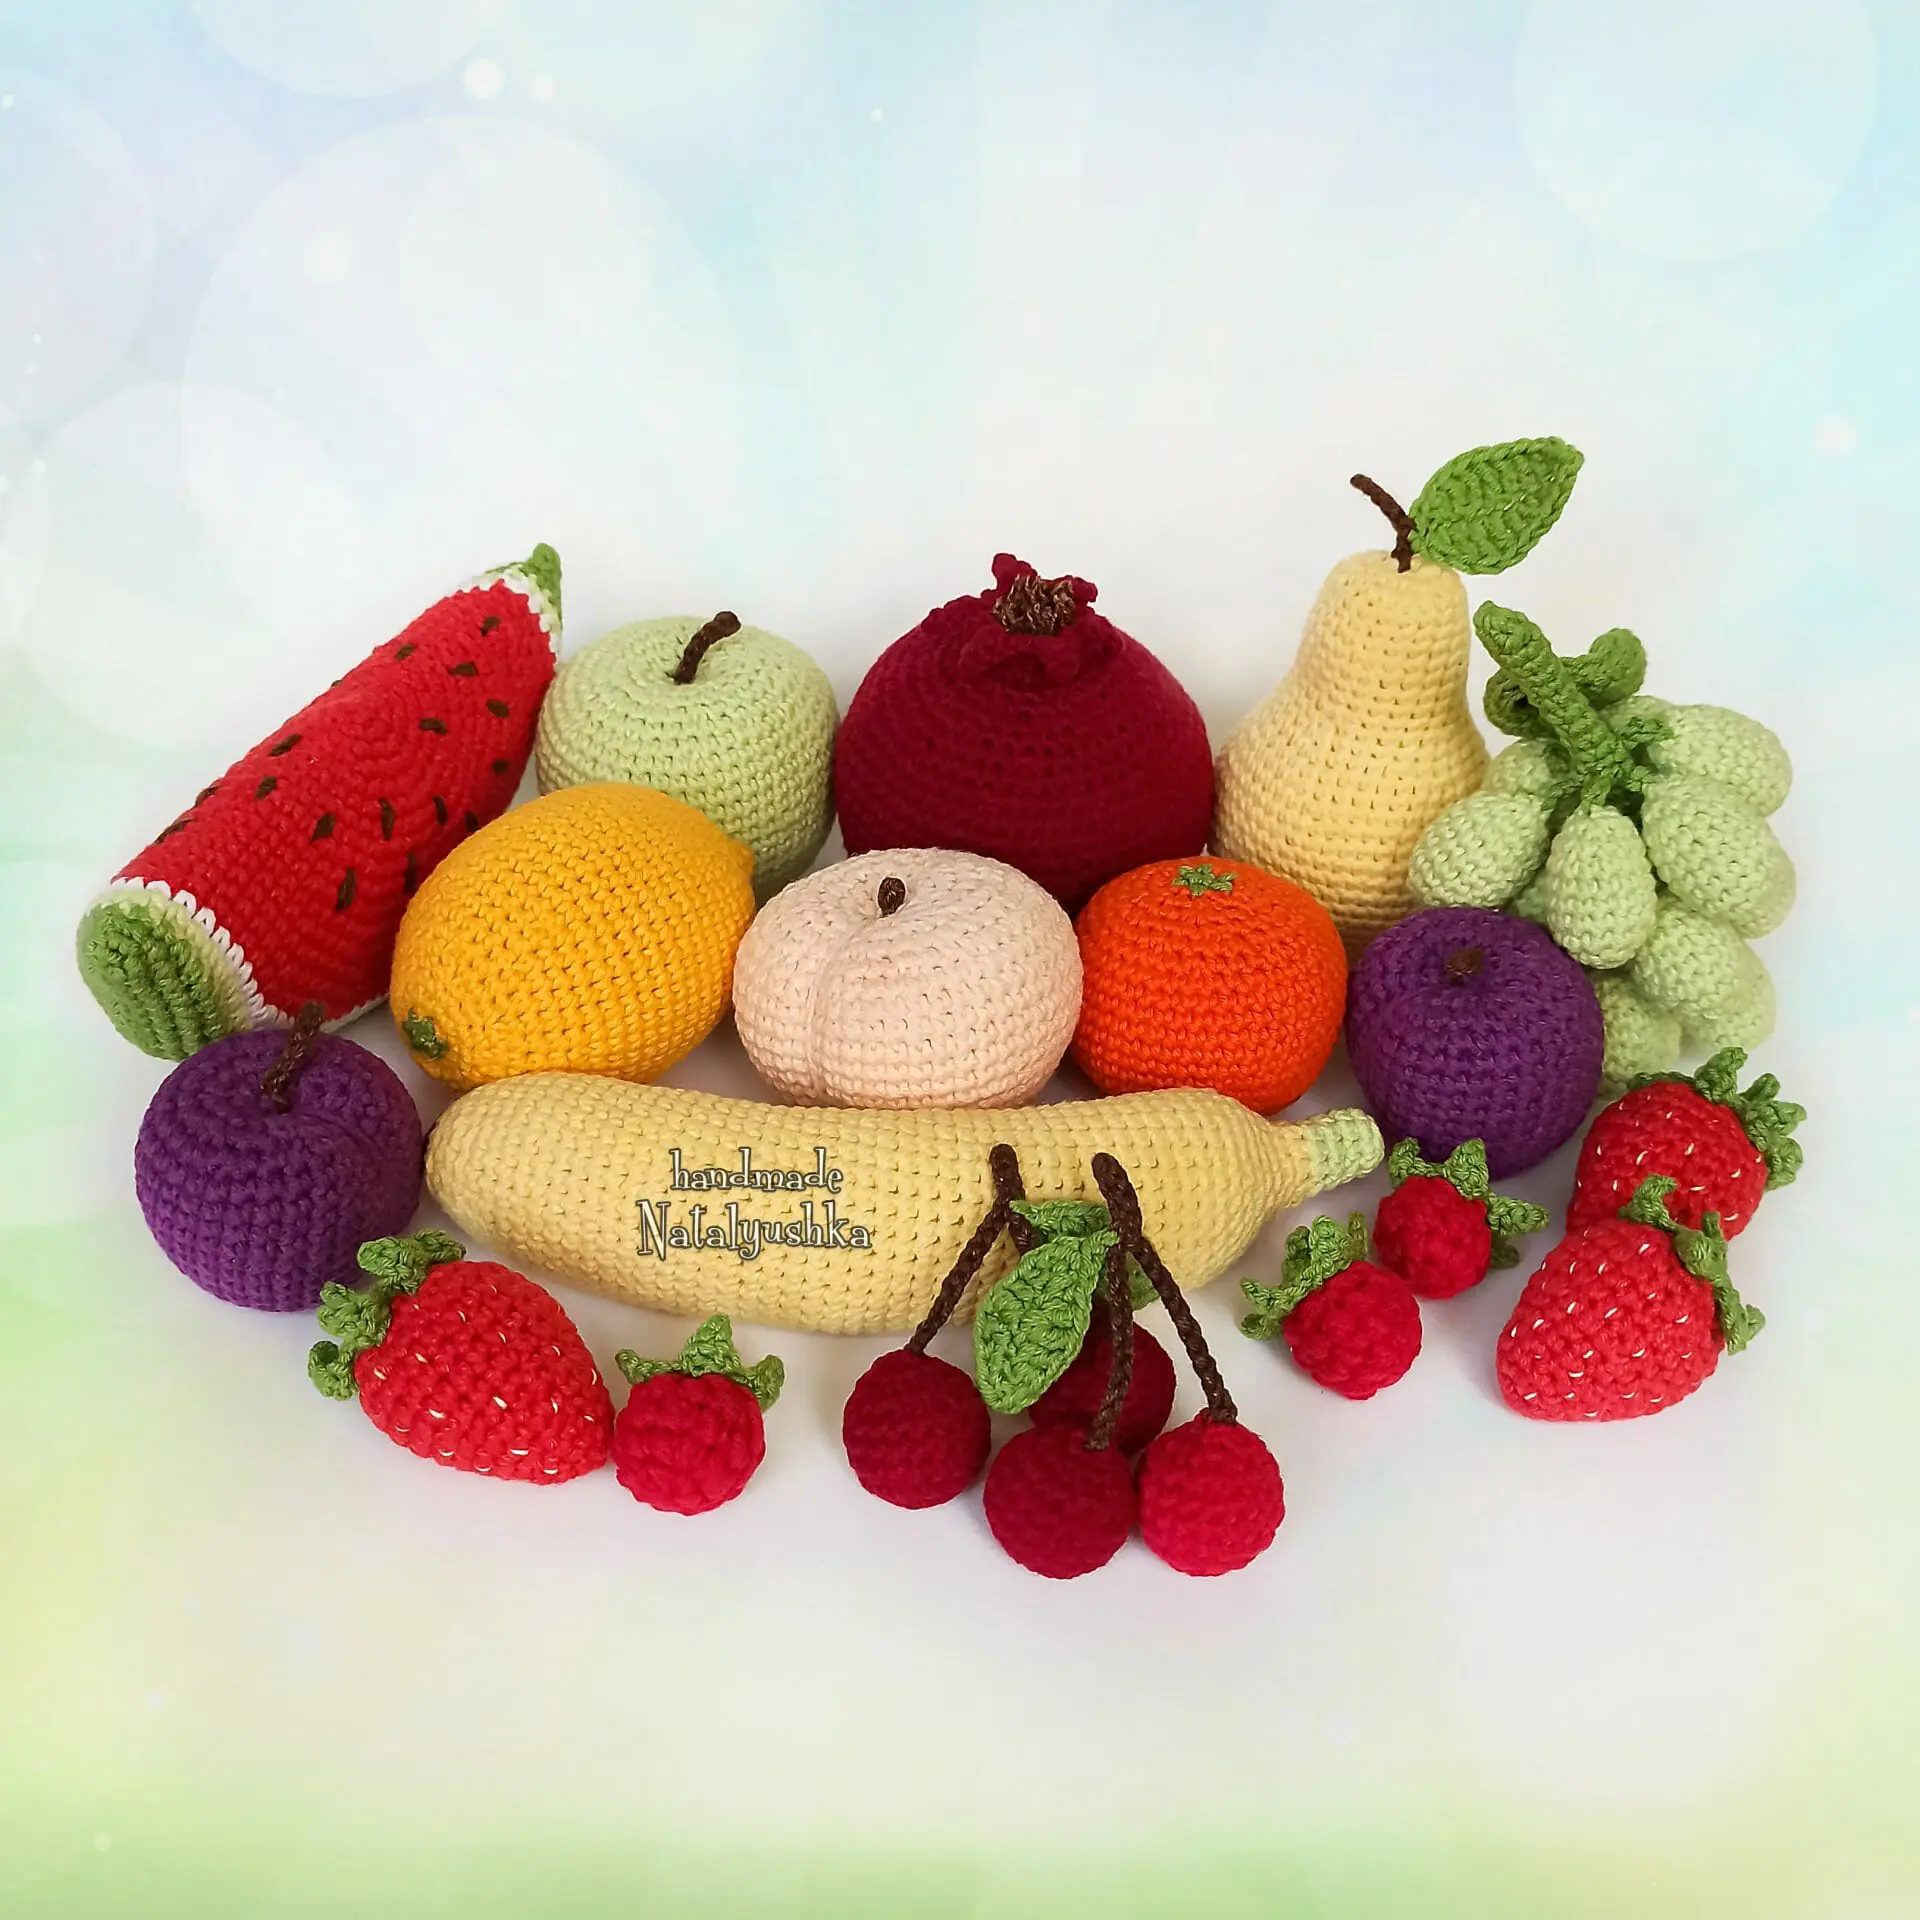 Fruits & Berries soft play set, Learning sensory toy.